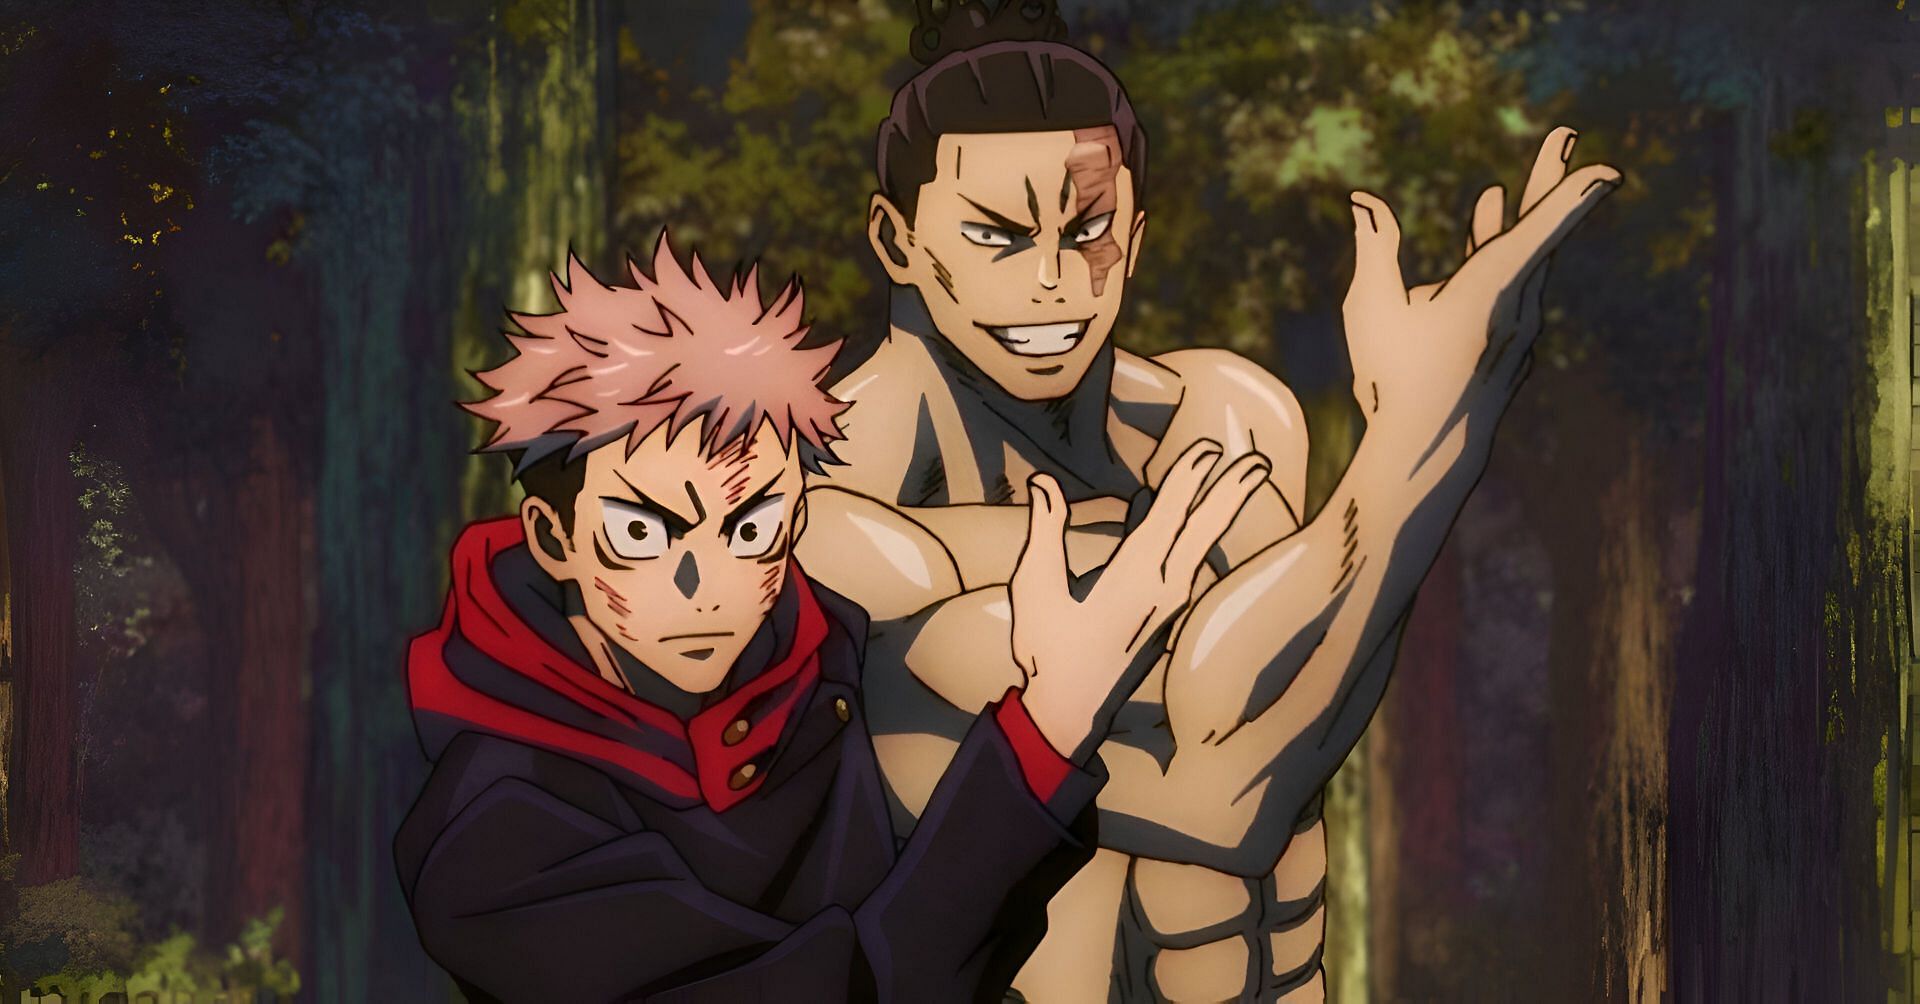 Jujutsu Kaisen chapter 260: Release date and time, what to expect, and more (Image via 